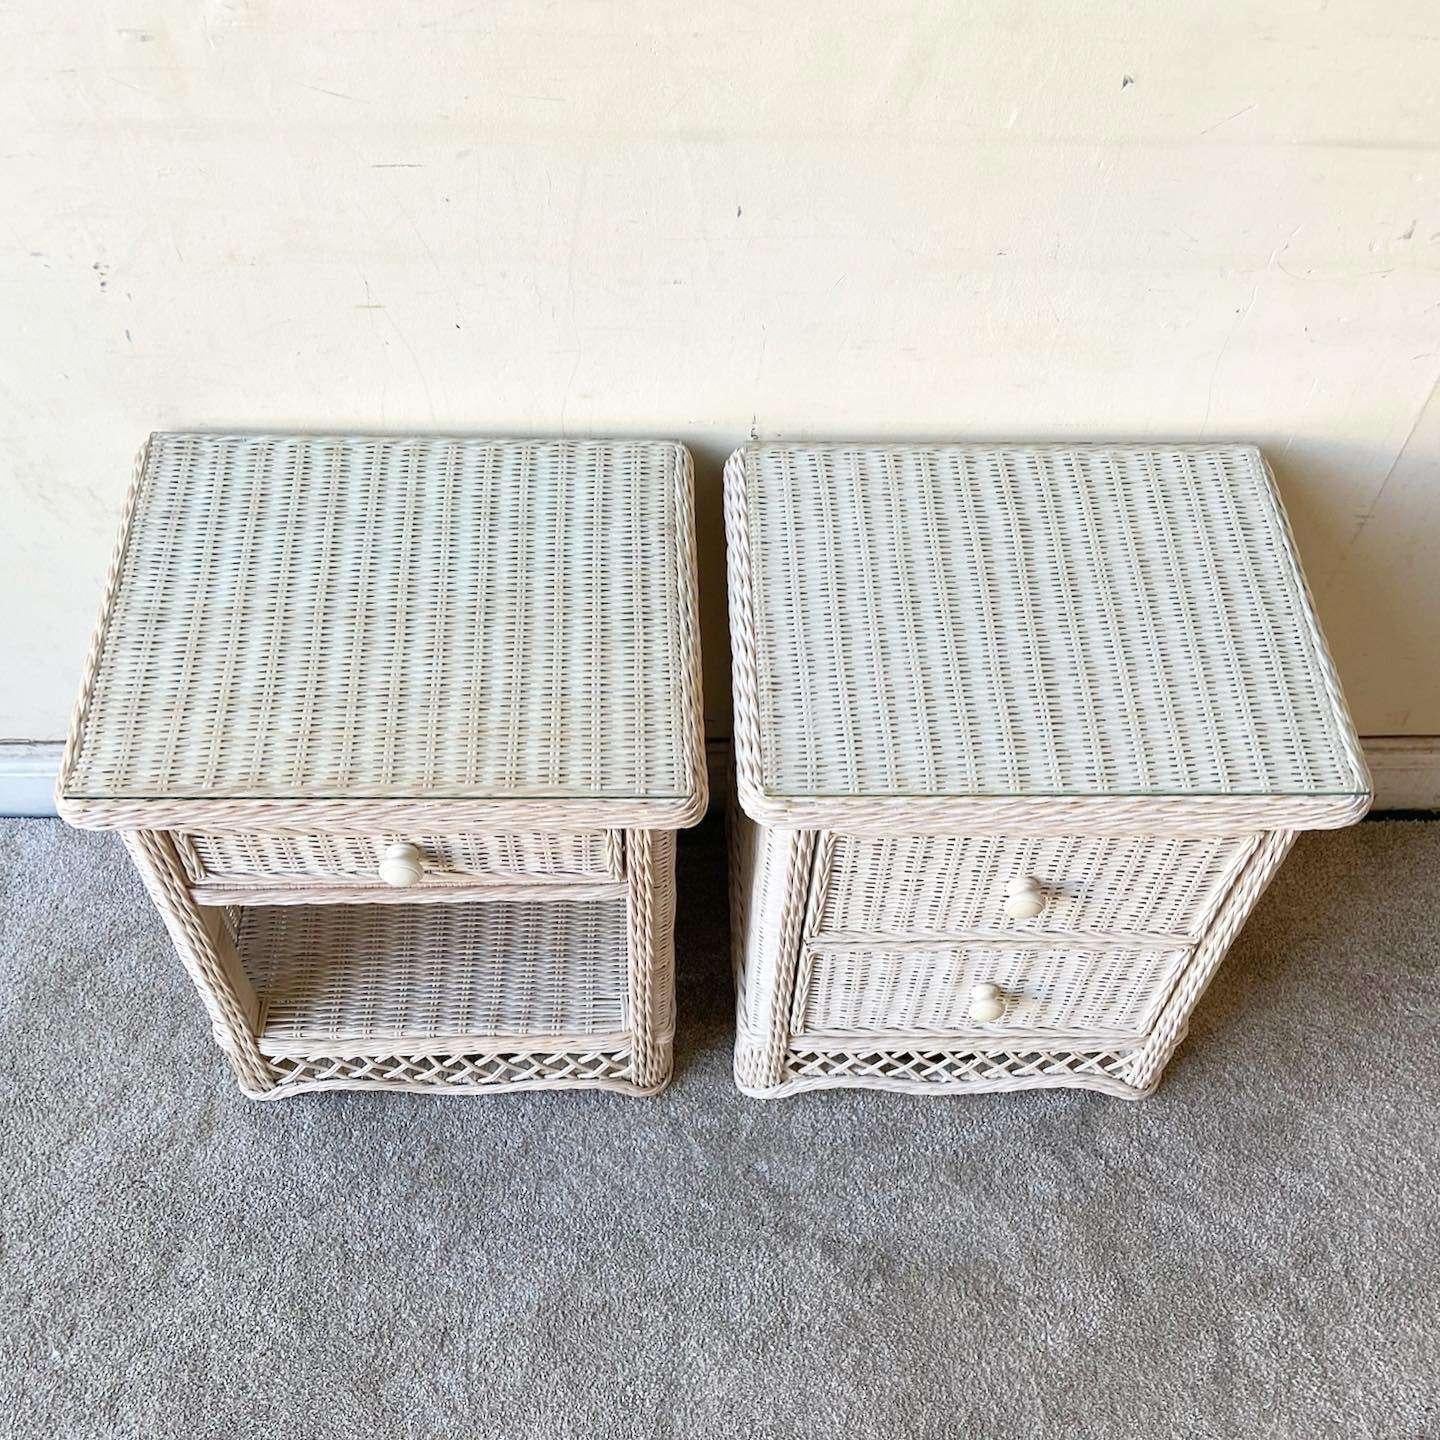 Late 20th Century 1990s Boho Chic White Wicker Glass Top Nightstands - Set of 2 For Sale